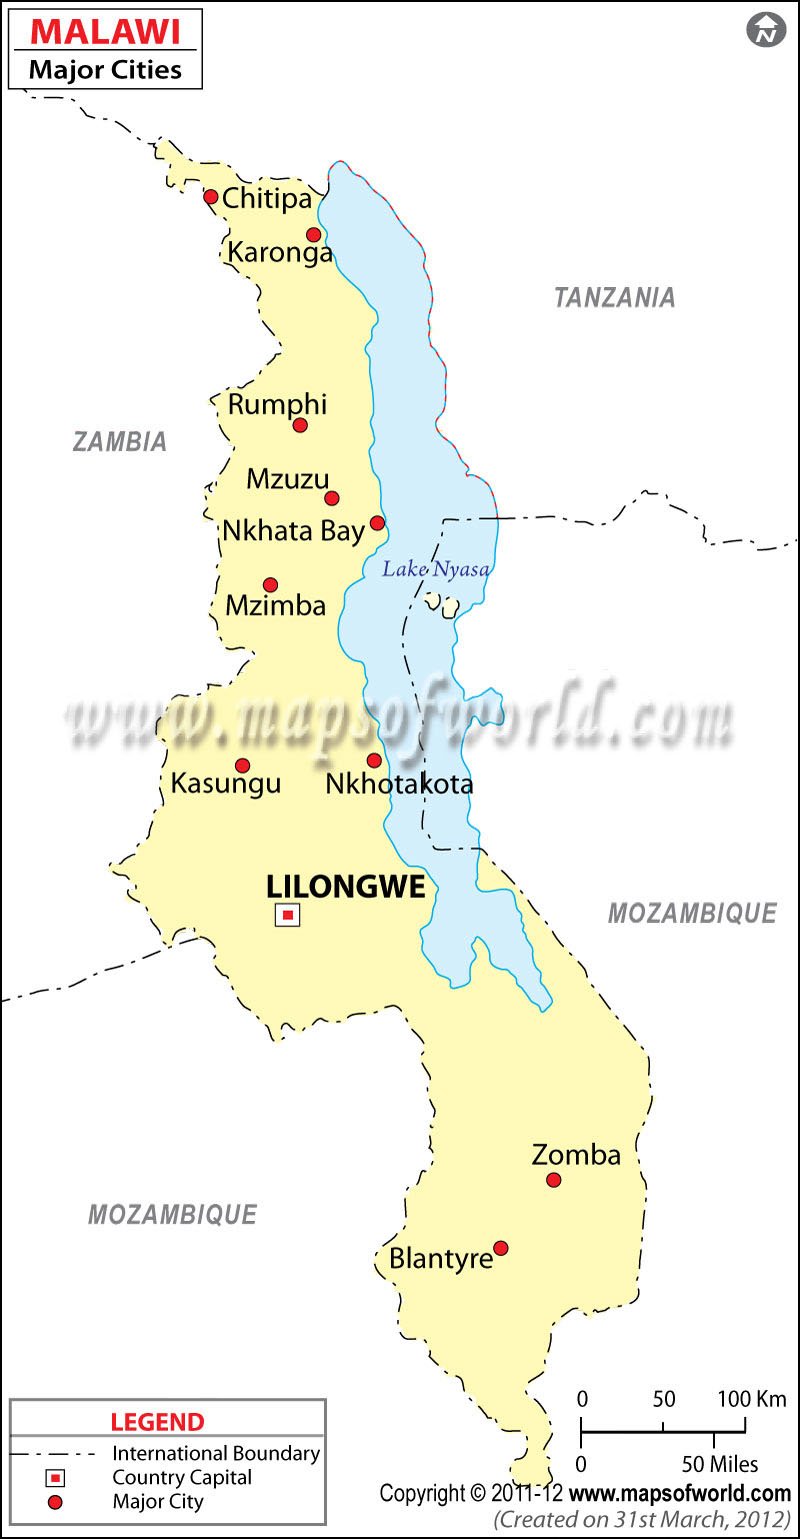 Major Cities in Malawi